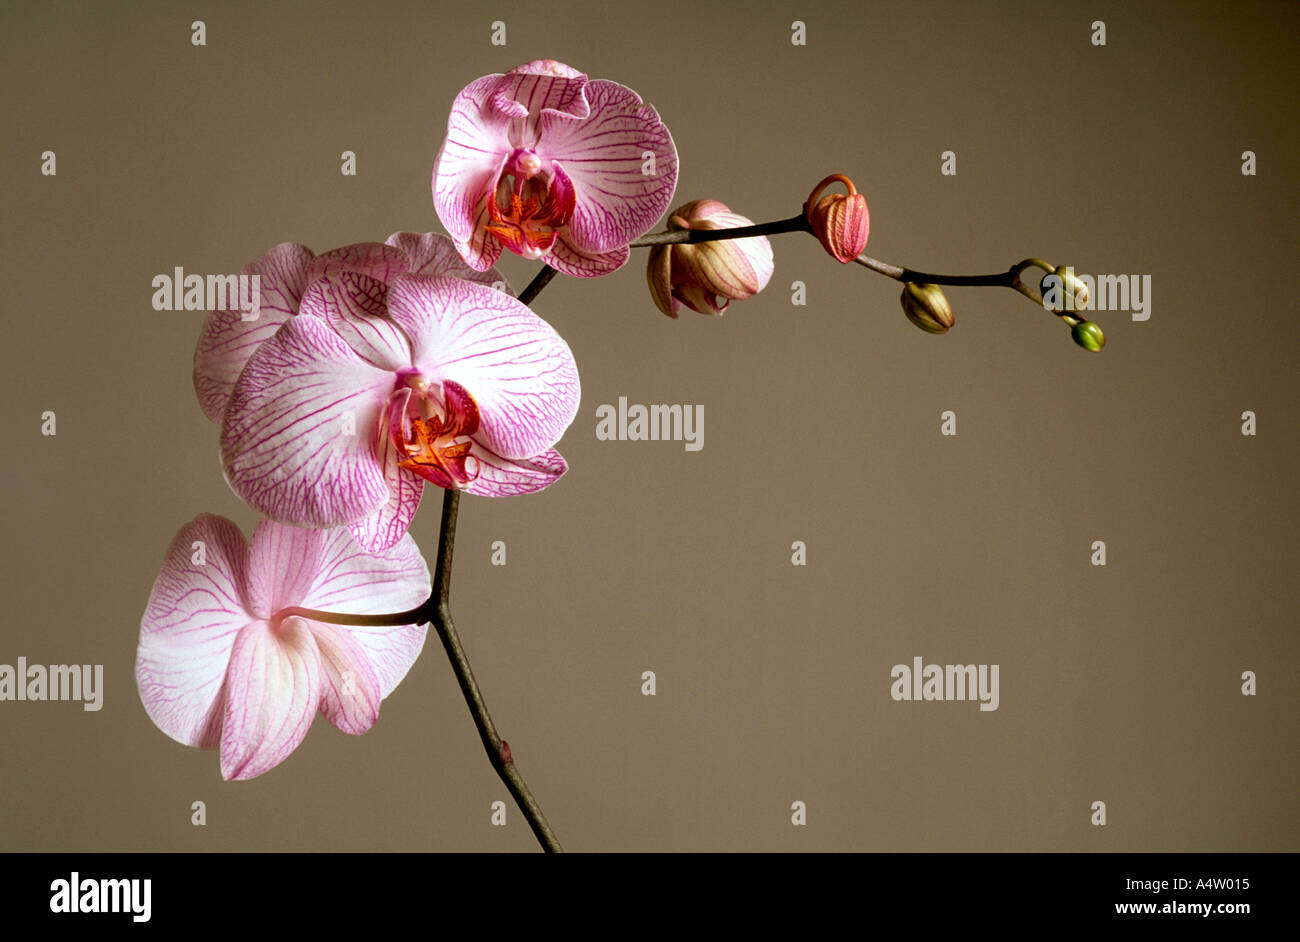 Candystripe pink flowering orchid Phalaenopsis Stock Photo